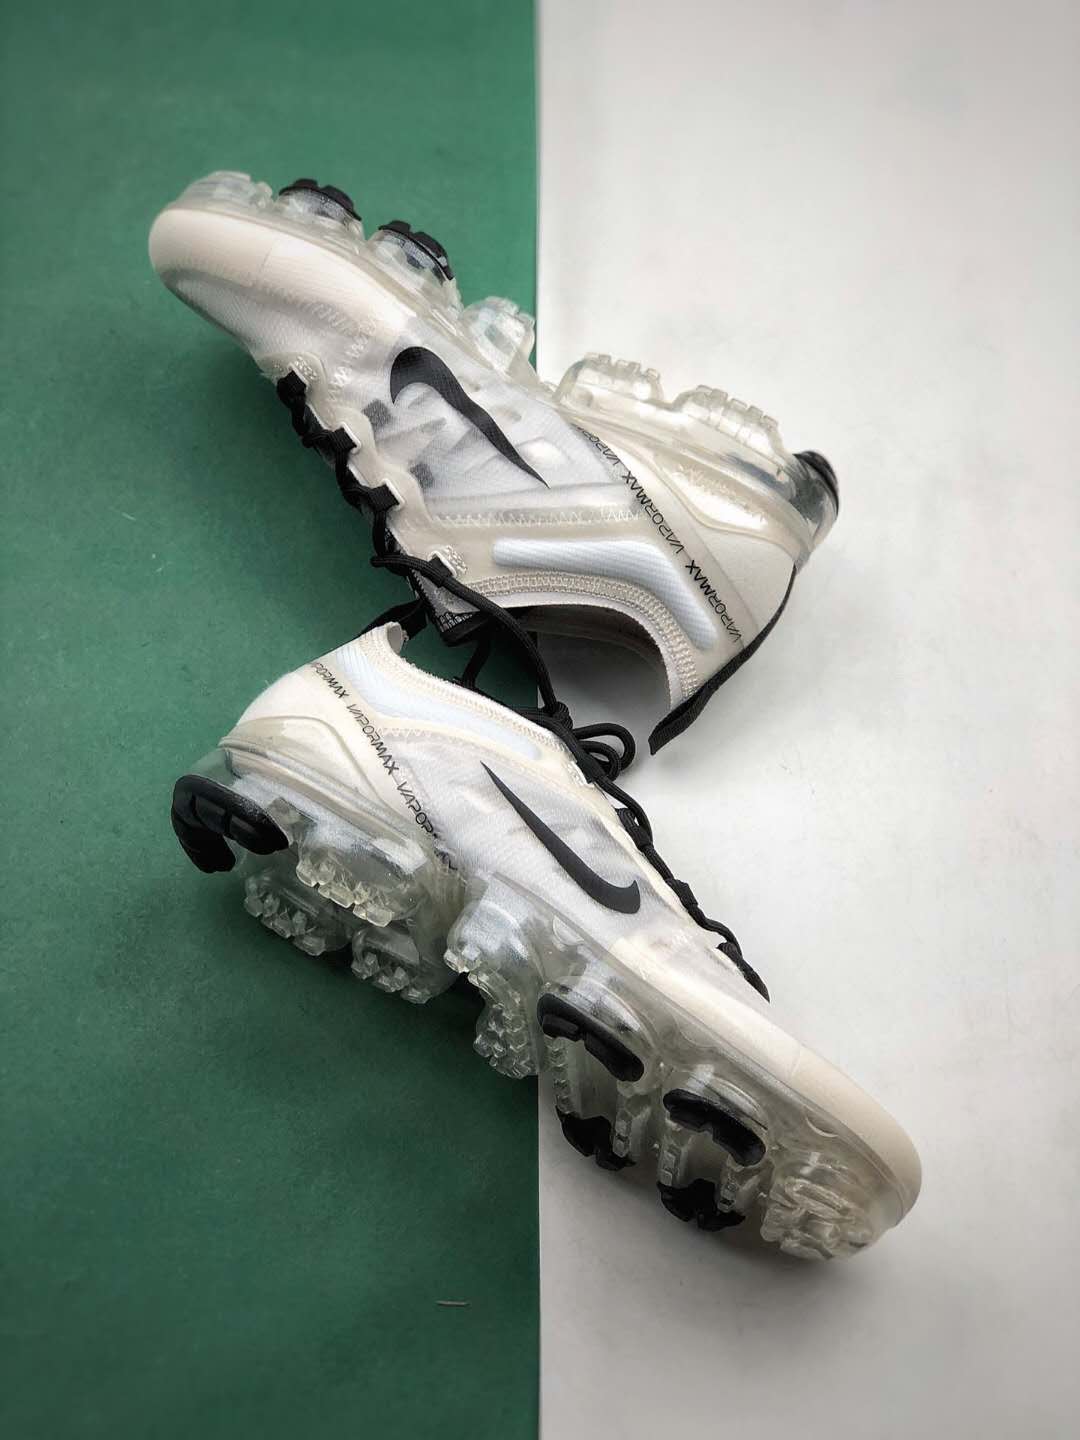 Nike Air Vapormax 2019 'Pale Ivory' AR6632-100 | Shop Now for Exclusive Nike Sneakers